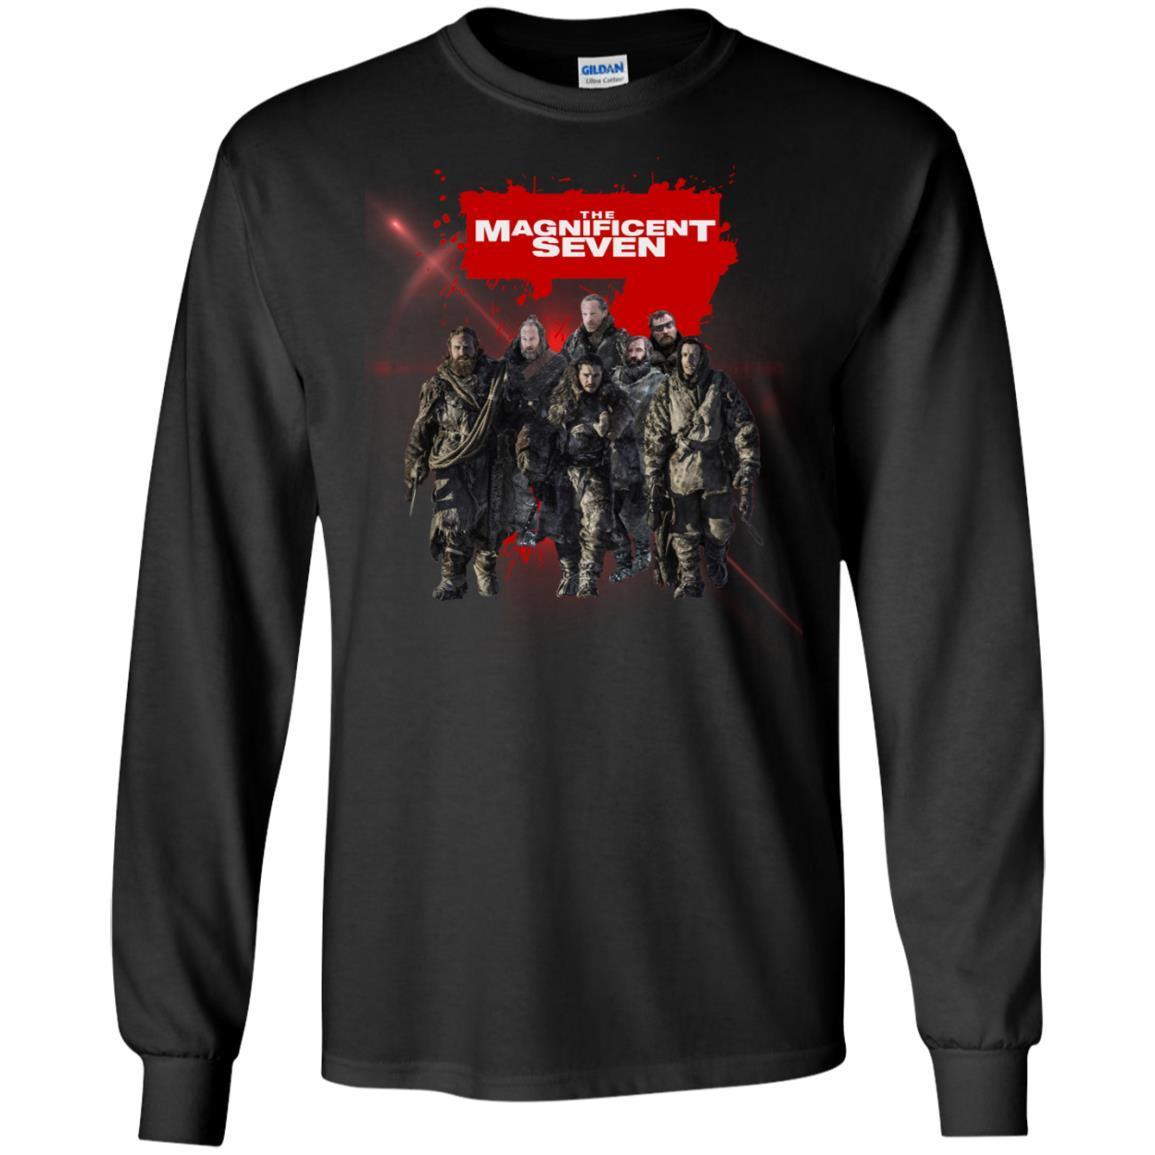 The Magnificent Seven Game Of Thrones Version T-shirt